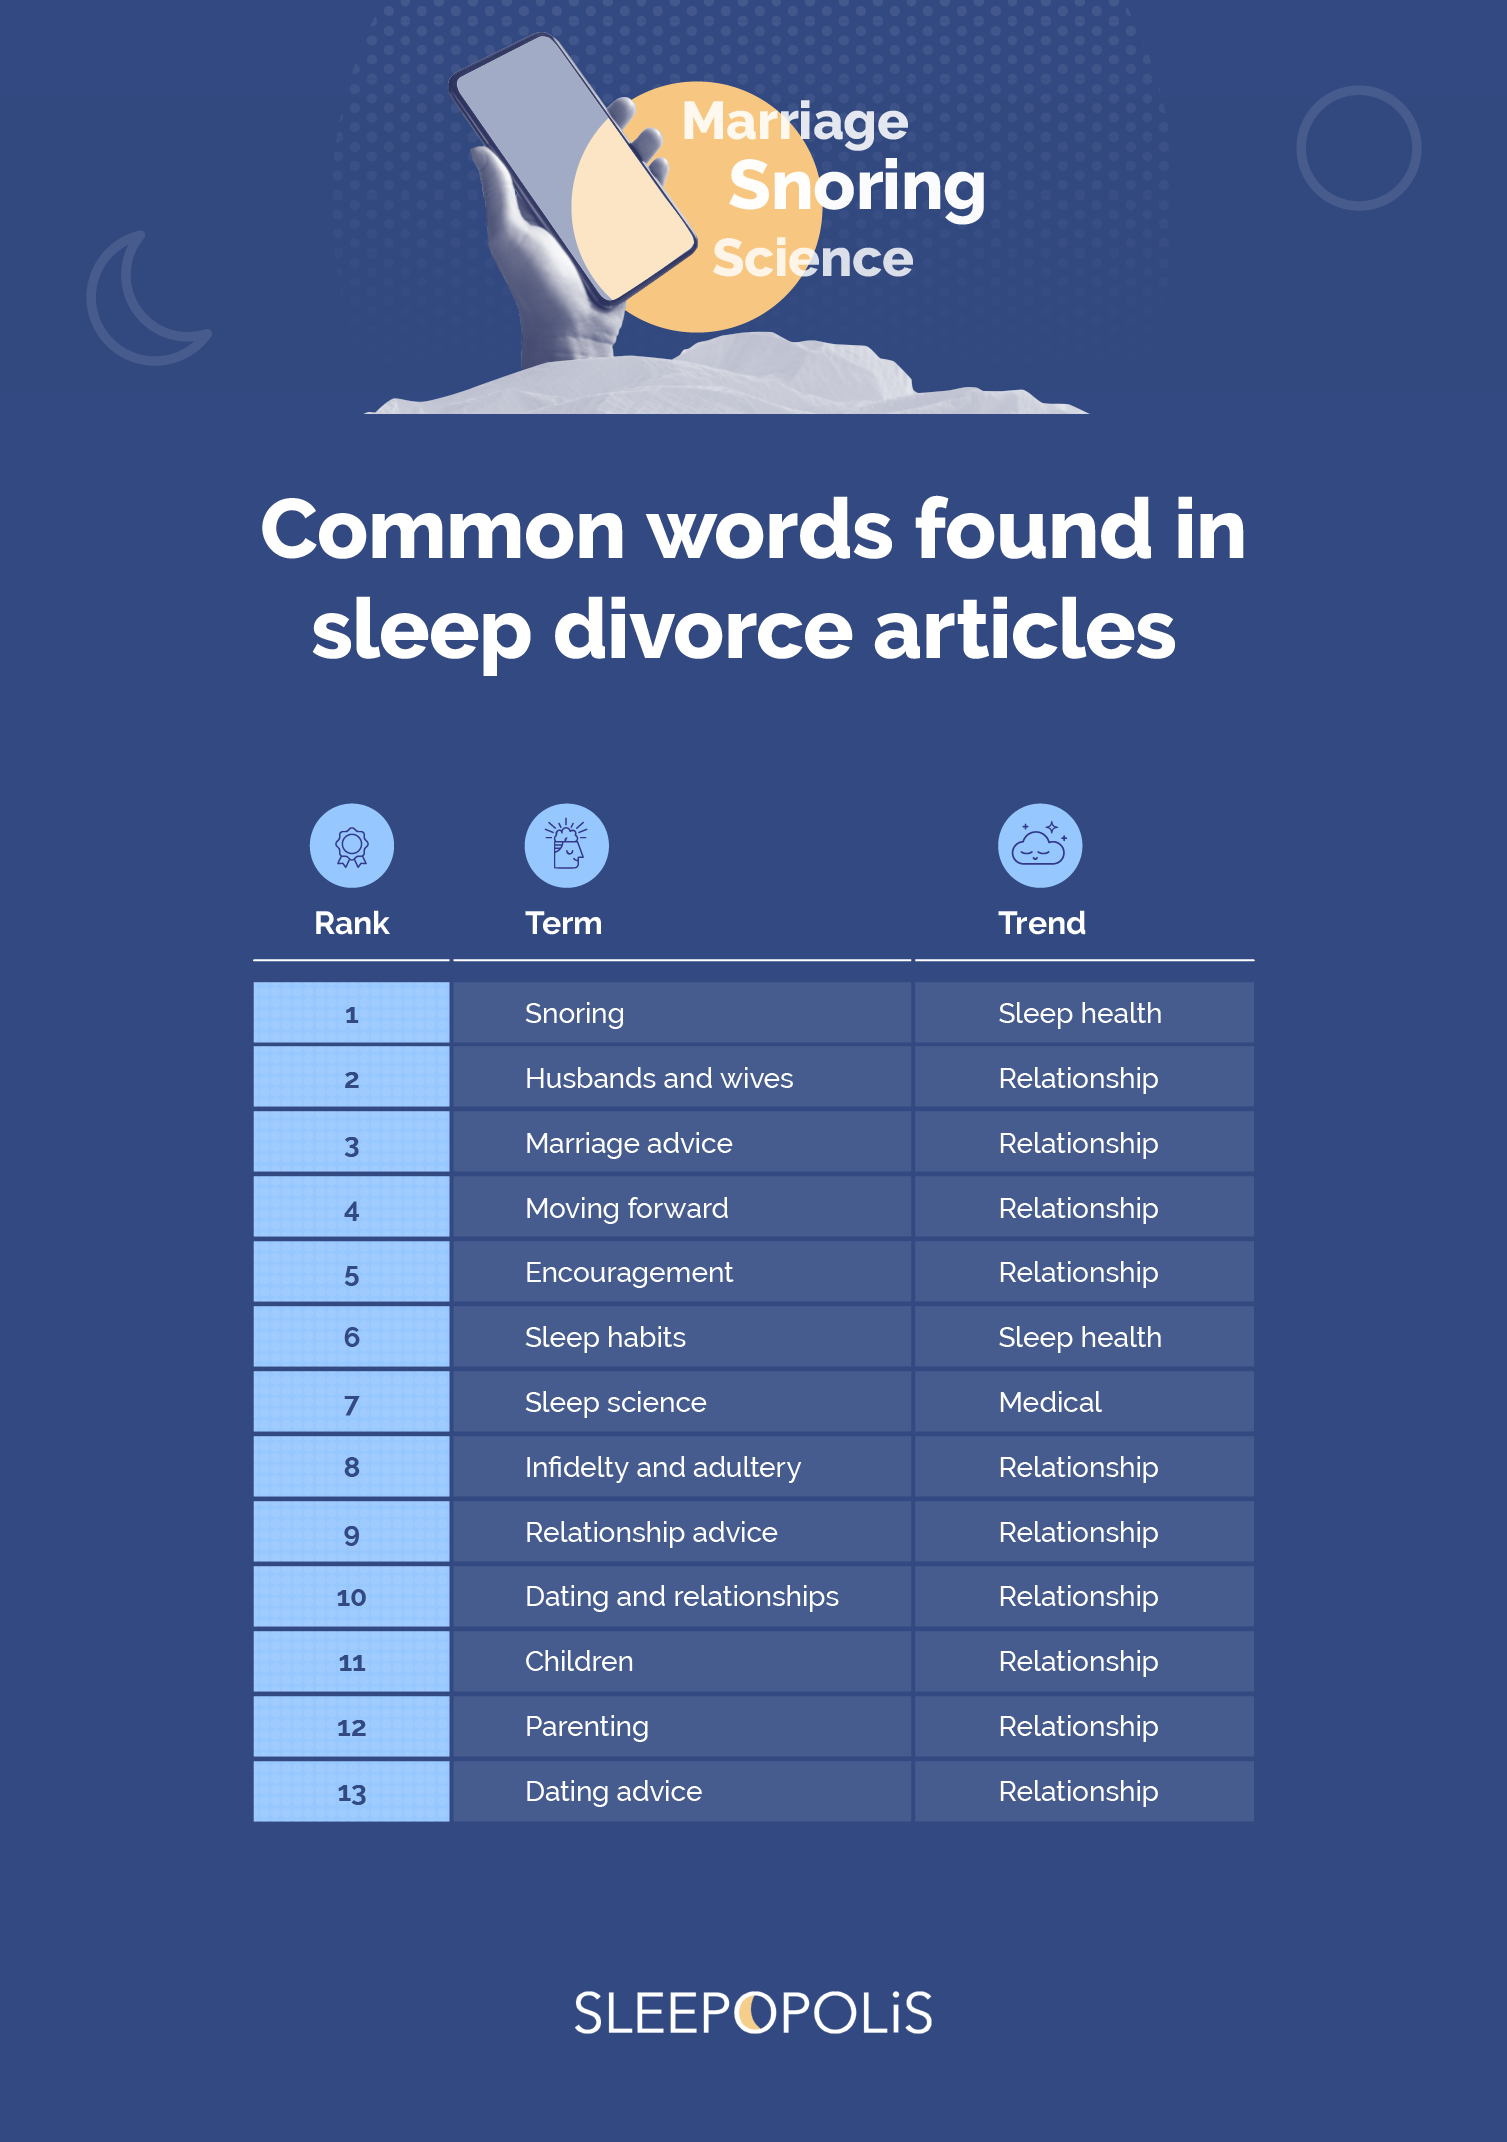 Table style graphic showing the most common words found within articles about sleep divorce.